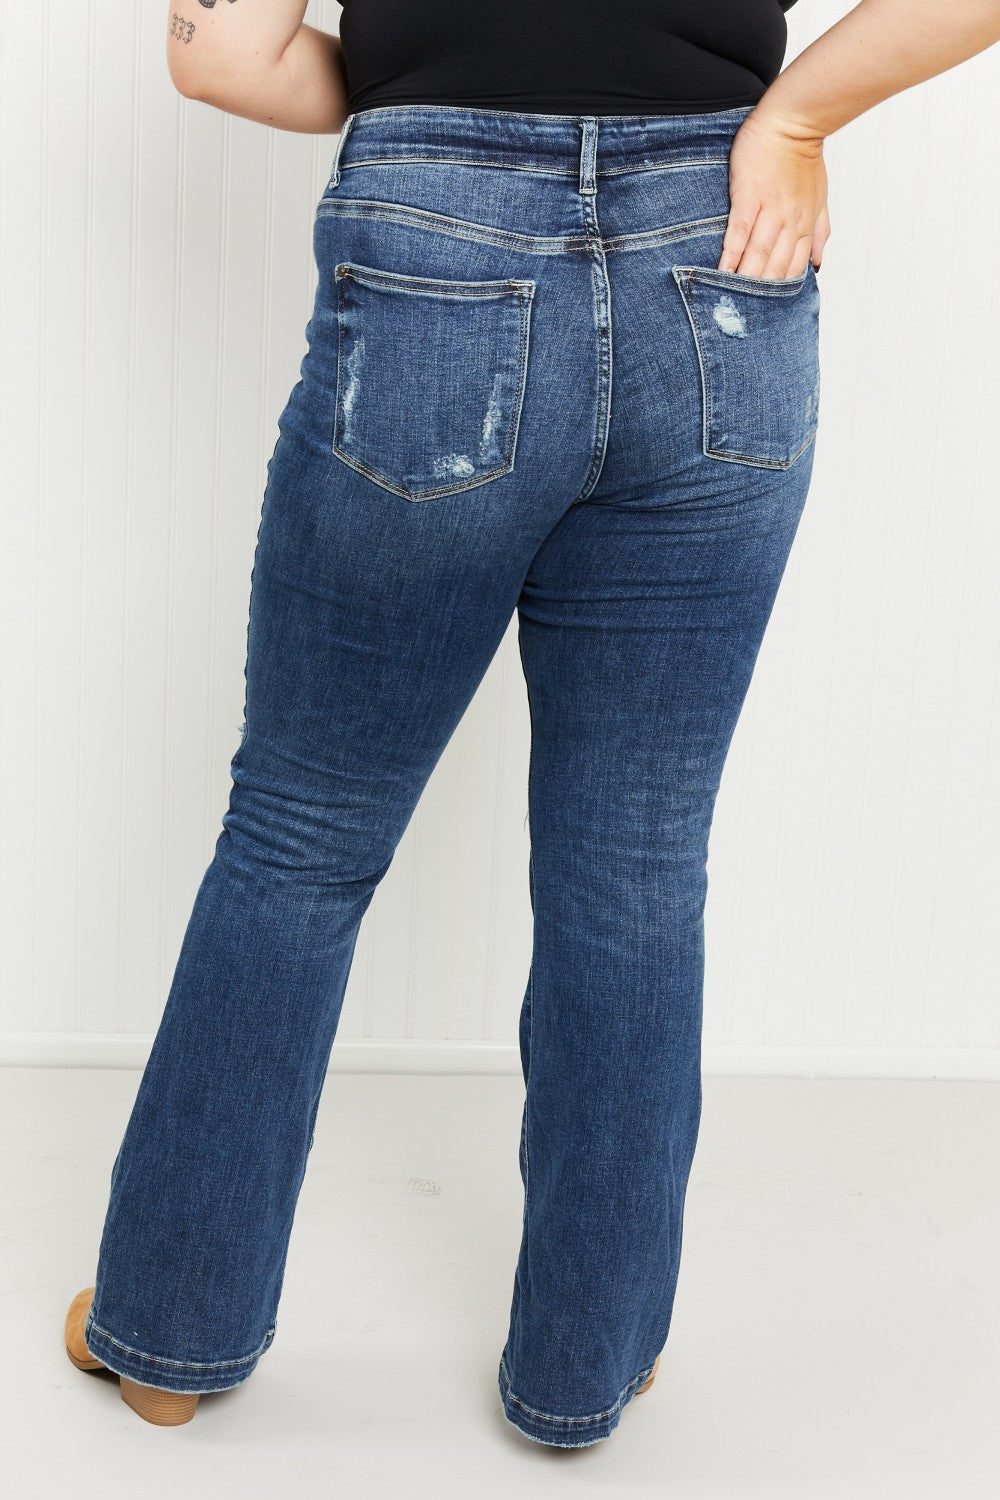 Judy Blue Ophelia Mid-Rise Destroyed Flare Jeans